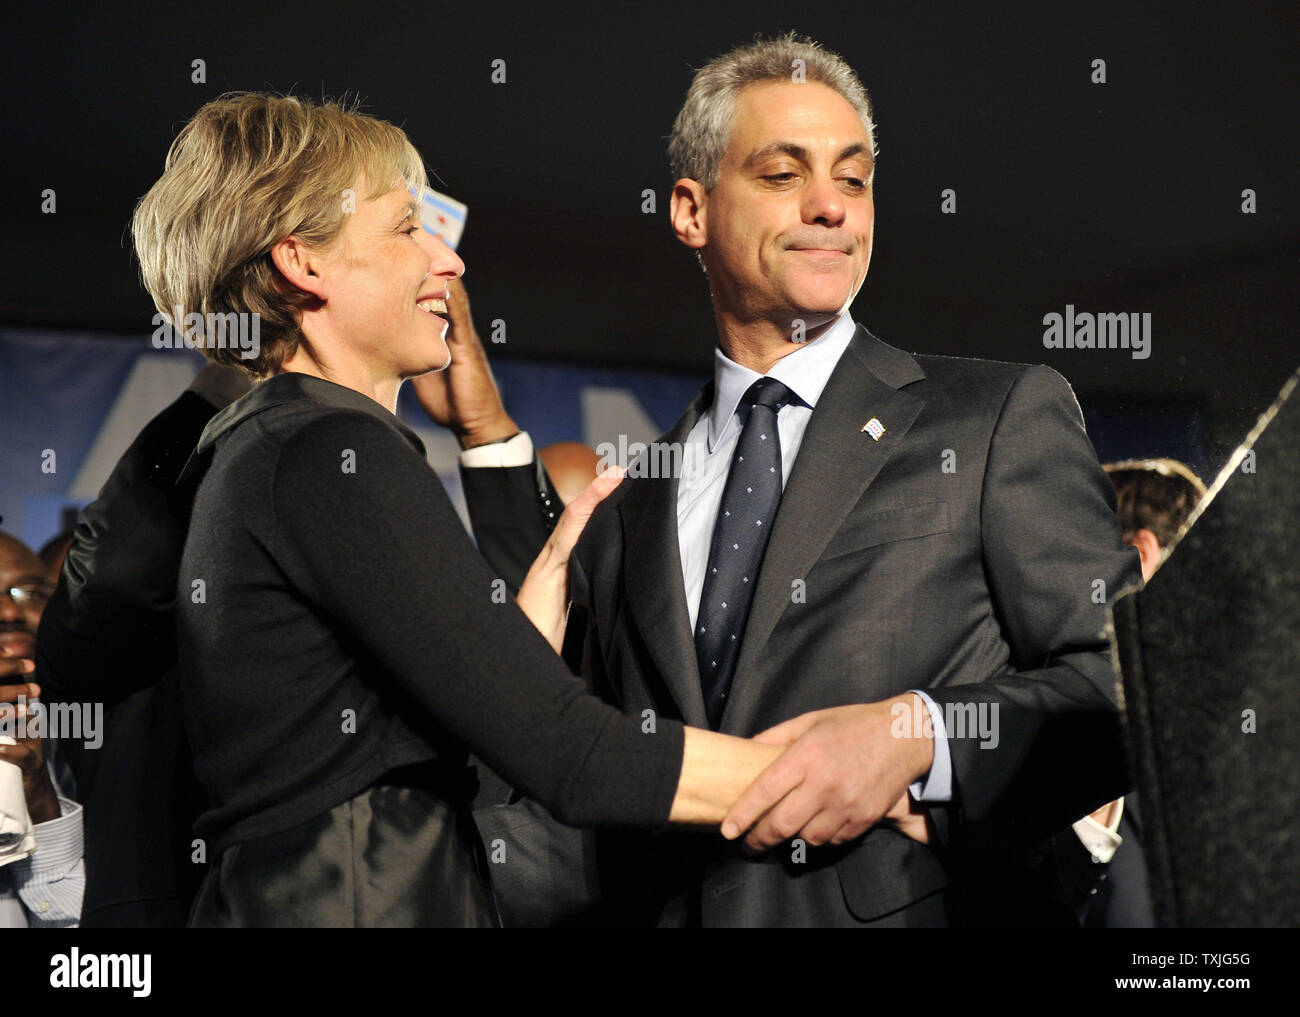 Chicago Mayoral Candidate Rahm Emanuel (R) hugs his wife Amy Rule as he speaks to supporters at an election-night rally in Chicago on February 22, 2011. The former White House chief of staff is being projected as the outright winner by gathering more than 50 percent of the votes in a six-candidate field.      UPI/Brian Kersey Stock Photo